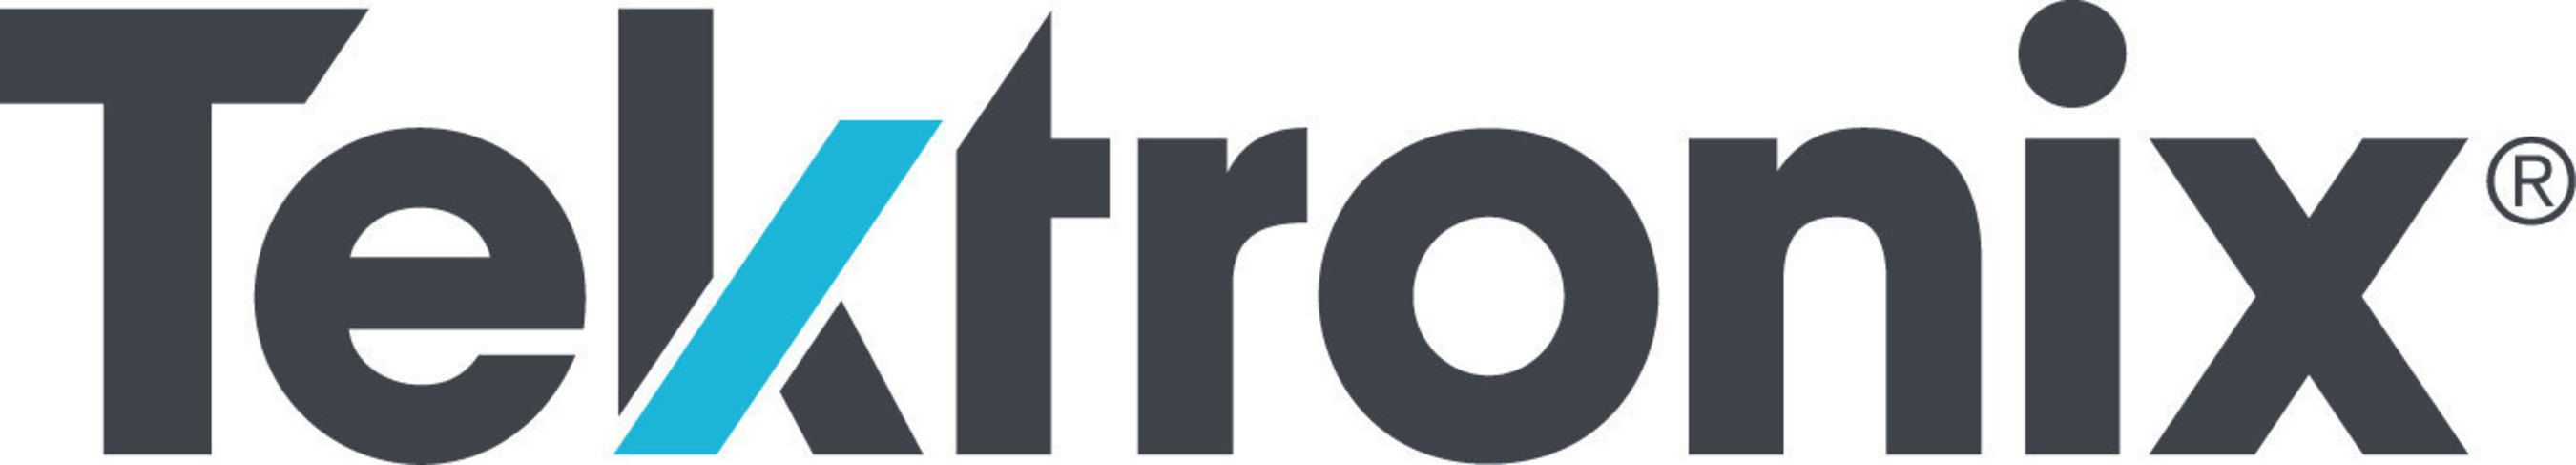 Tektronix unveils new logo, marking the most significant change in its visual identity in 24 years.The legacy Tektronix logo has been refashioned, with the angle incorporated within the logotype as an upwards gesture of progress. The sans-serif type is given character by subtly clipping the 'T' letterforms, echoing the blue angle. Simple, definitive lines reflect our promise of performance.